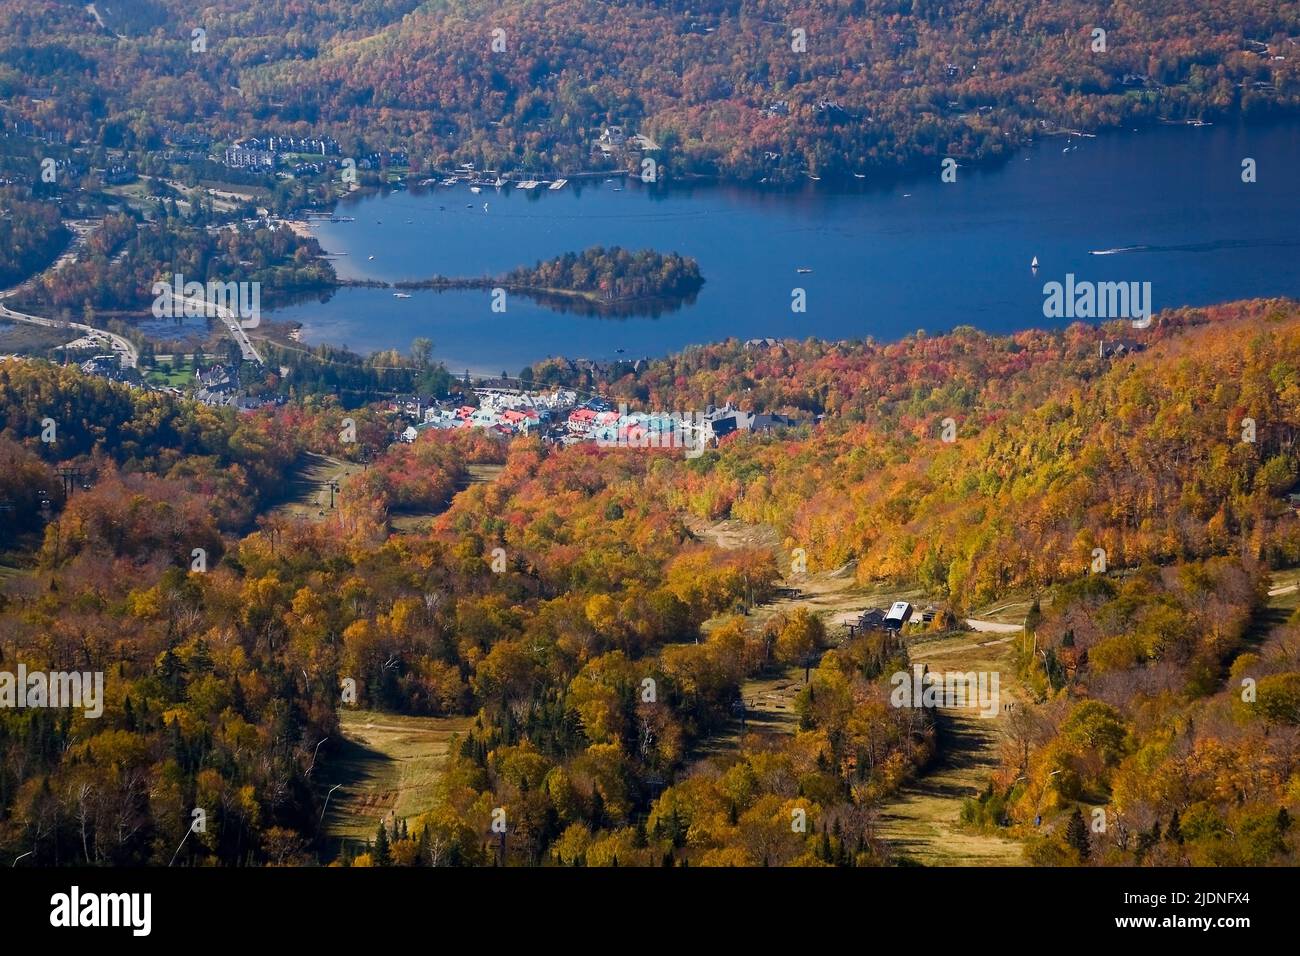 High-angle view of Mont-Tremblant lake and resort in autumn taken from the summit of Mont-Tremblant, Laurentians, Quebec, Canada. Stock Photo